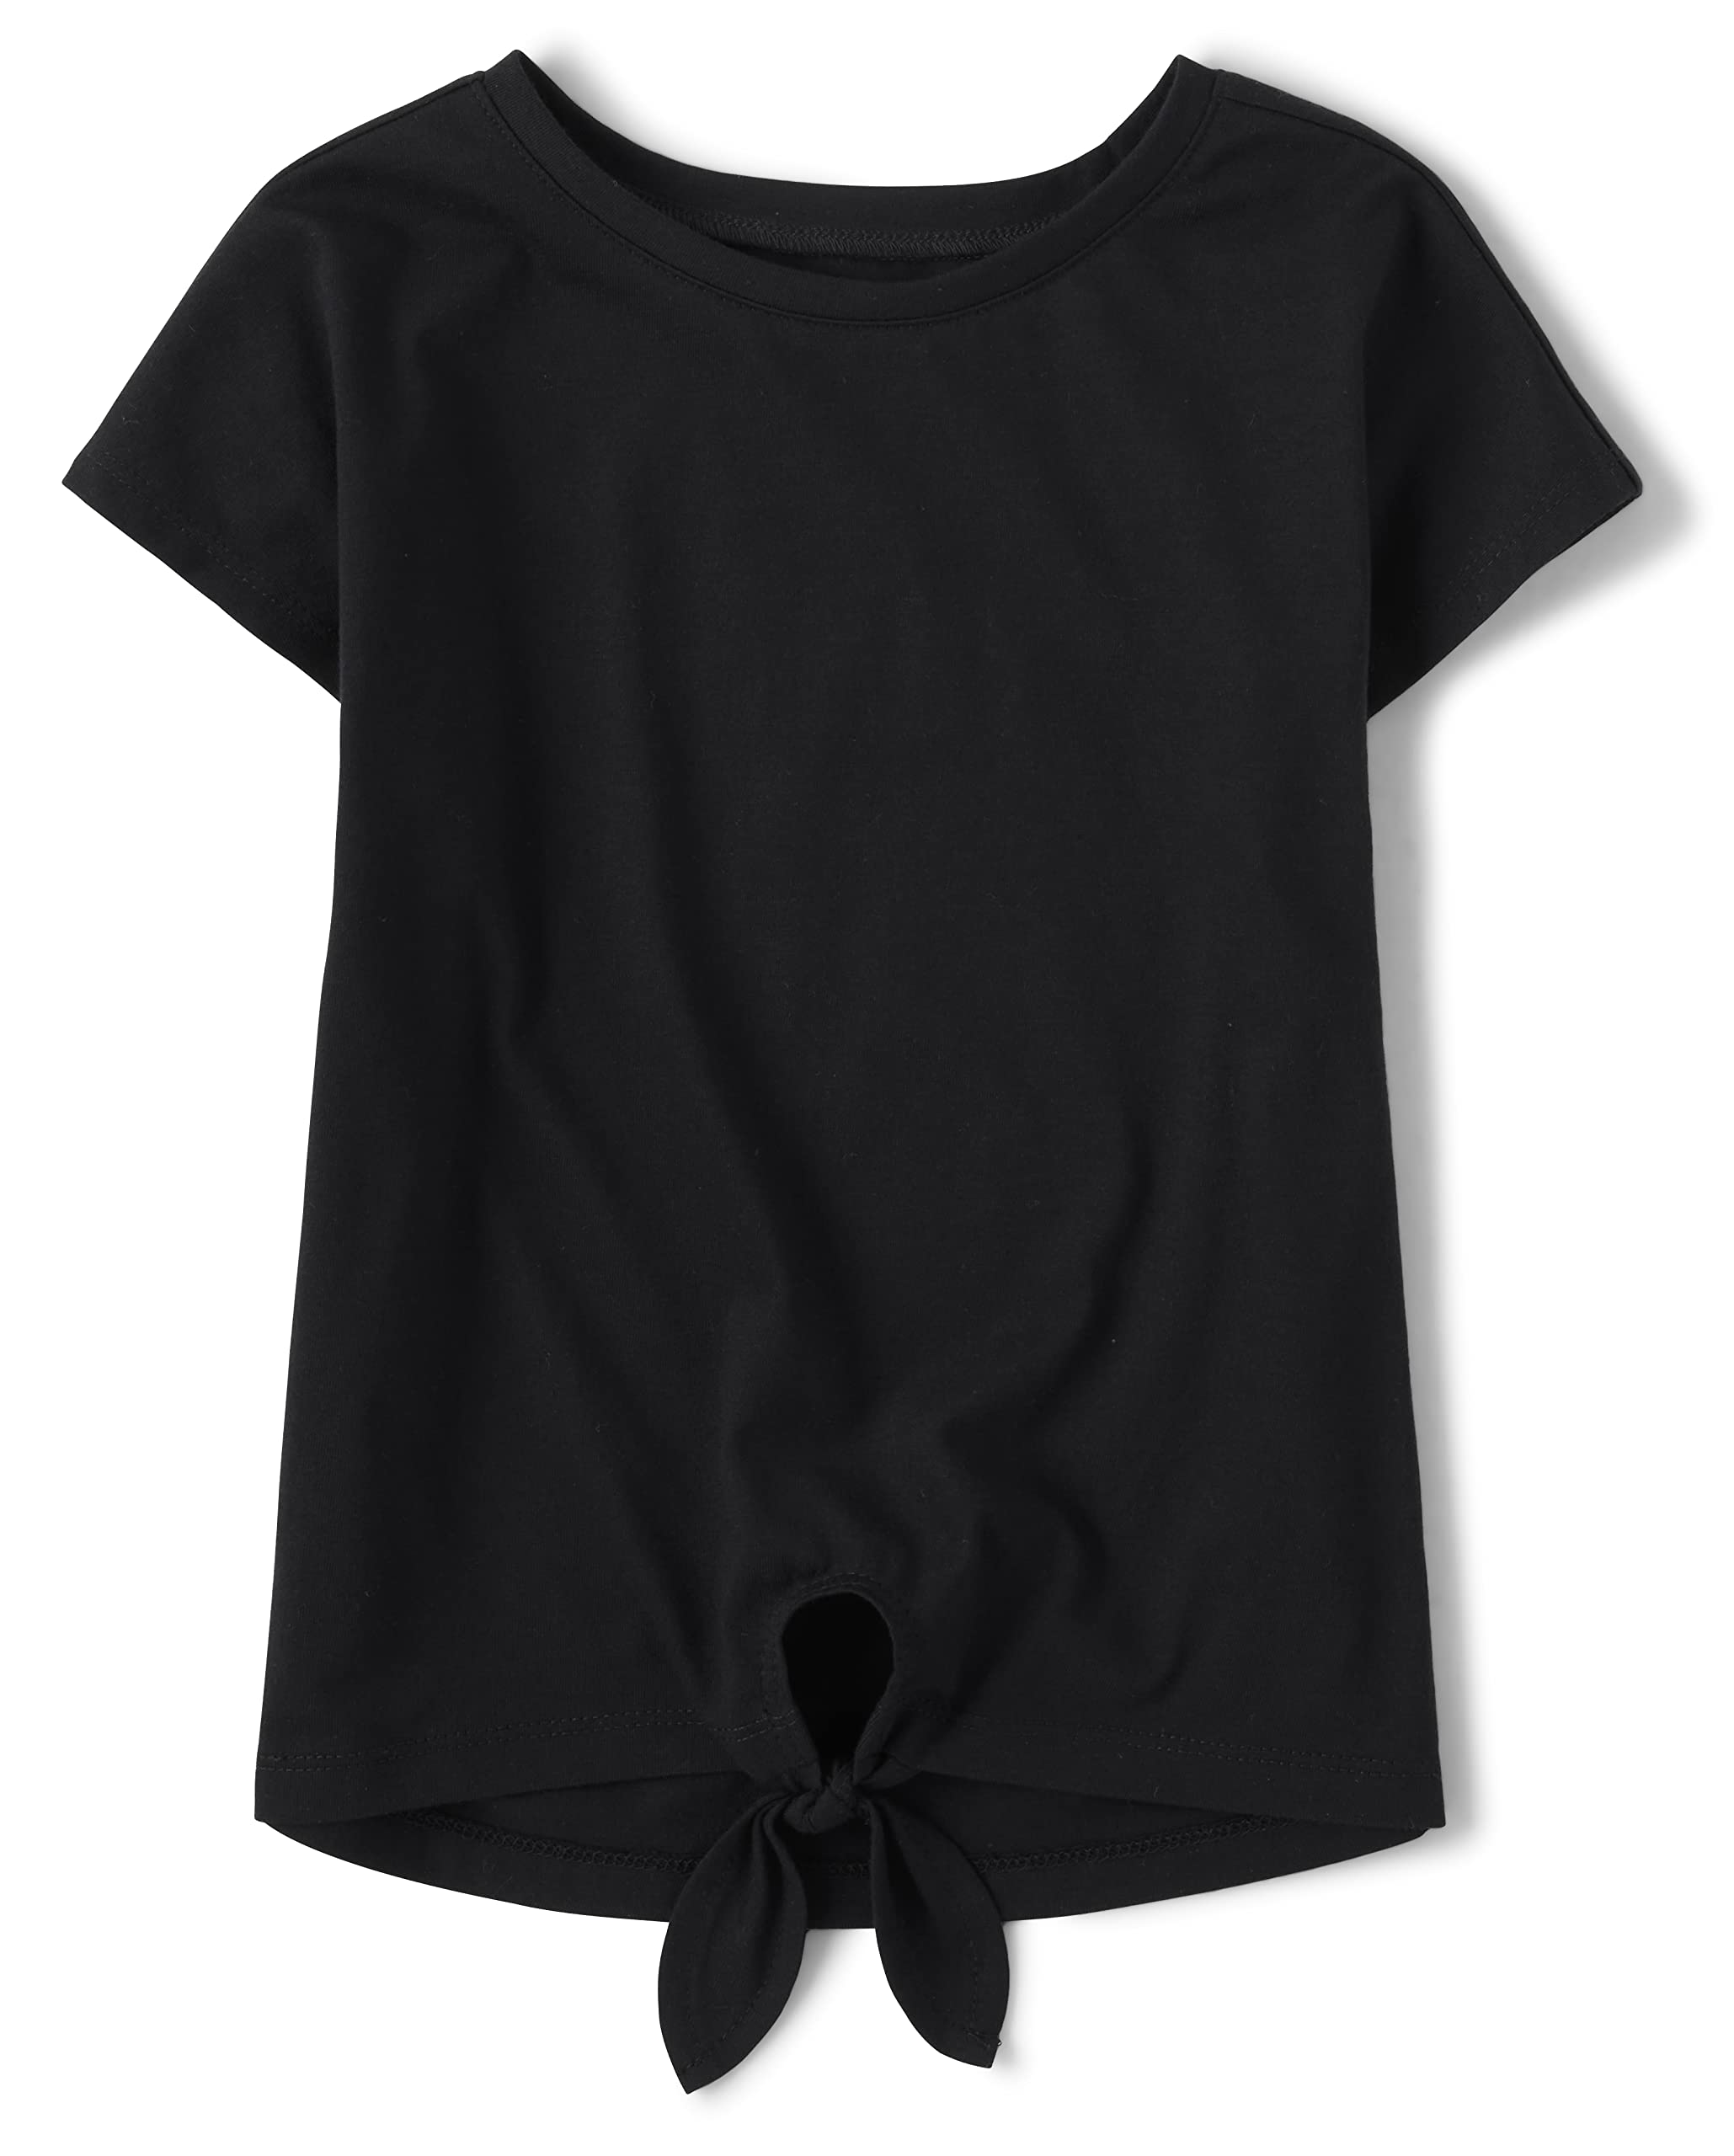 The Children's Place Girls' Short Sleeve Tie Front Top